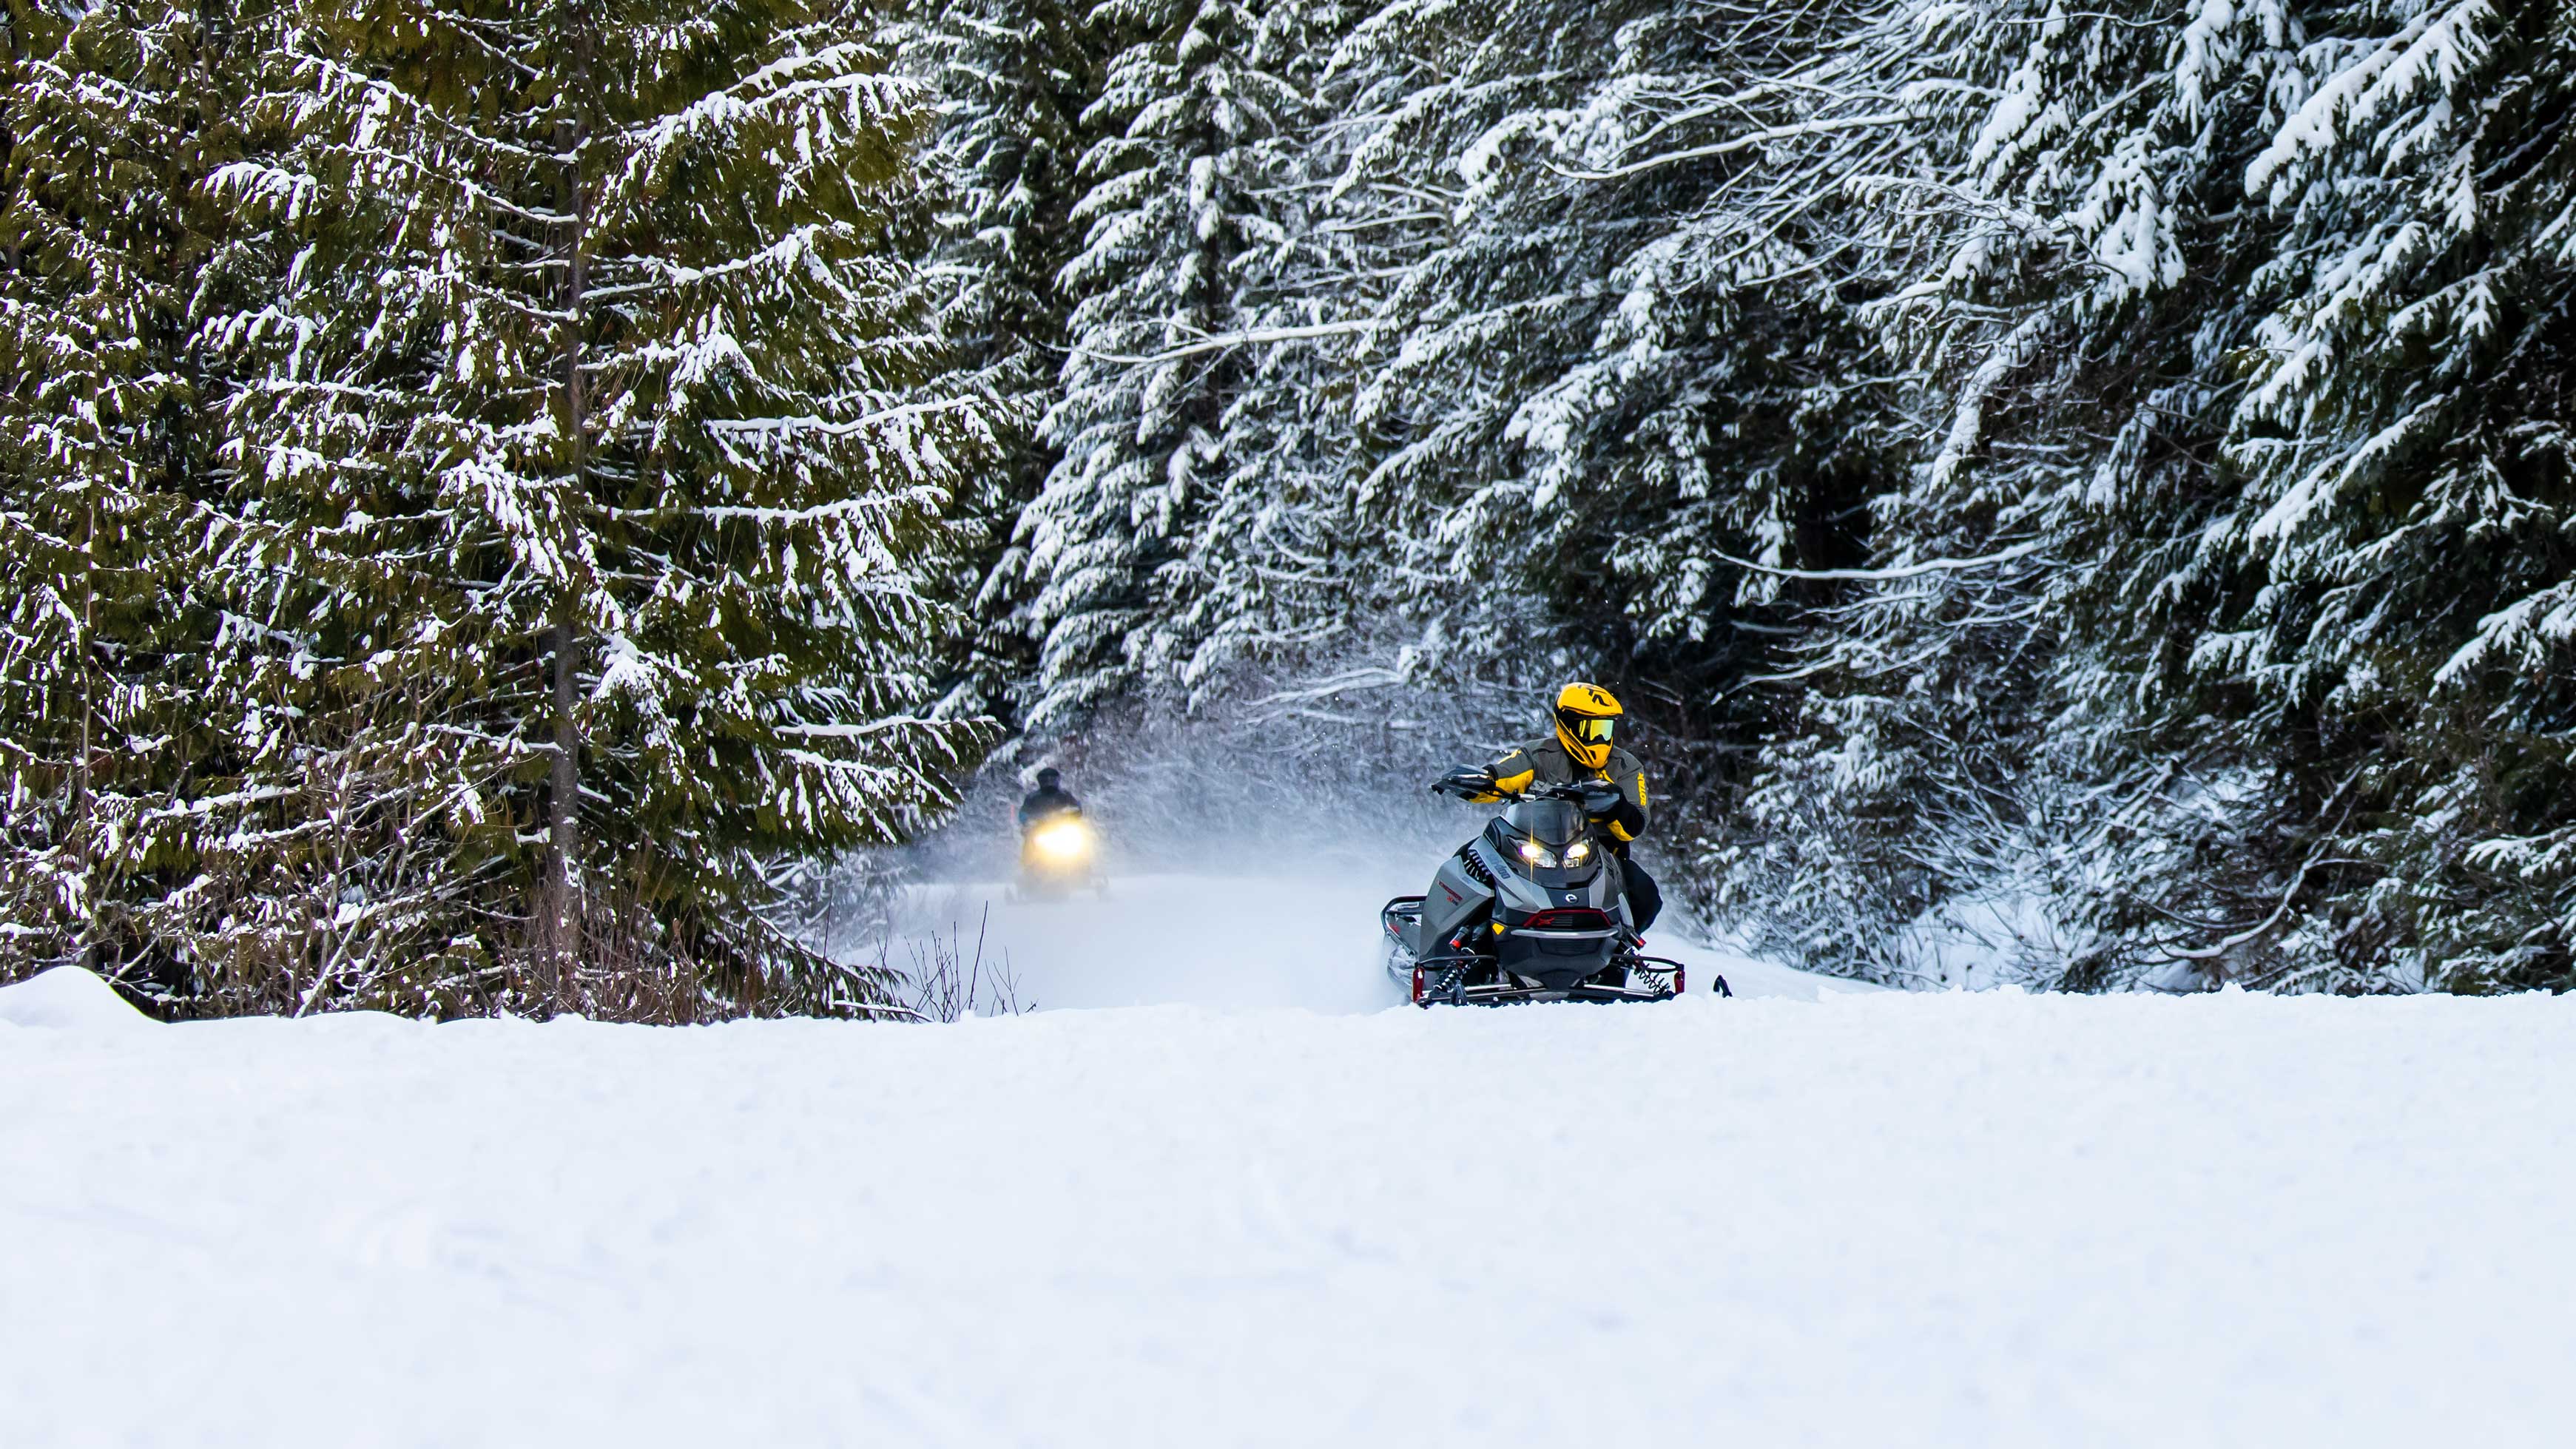 Two riders on a trail driving Ski-Doo snowmobiles